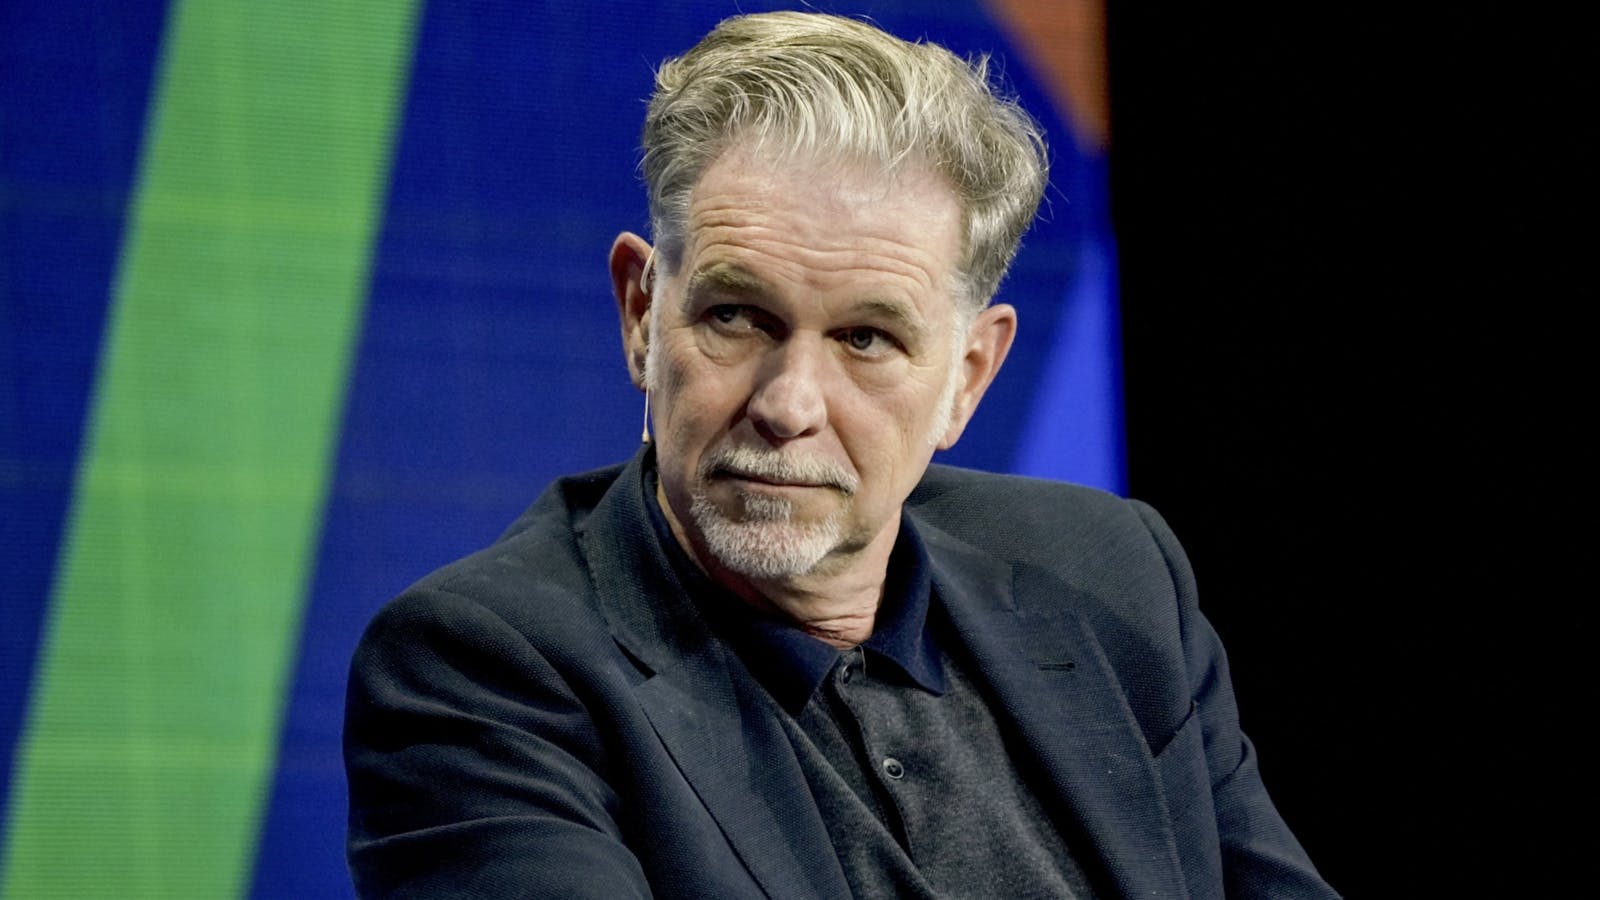 Netflix co-CEO Reed Hastings. Photo by Bloomberg.